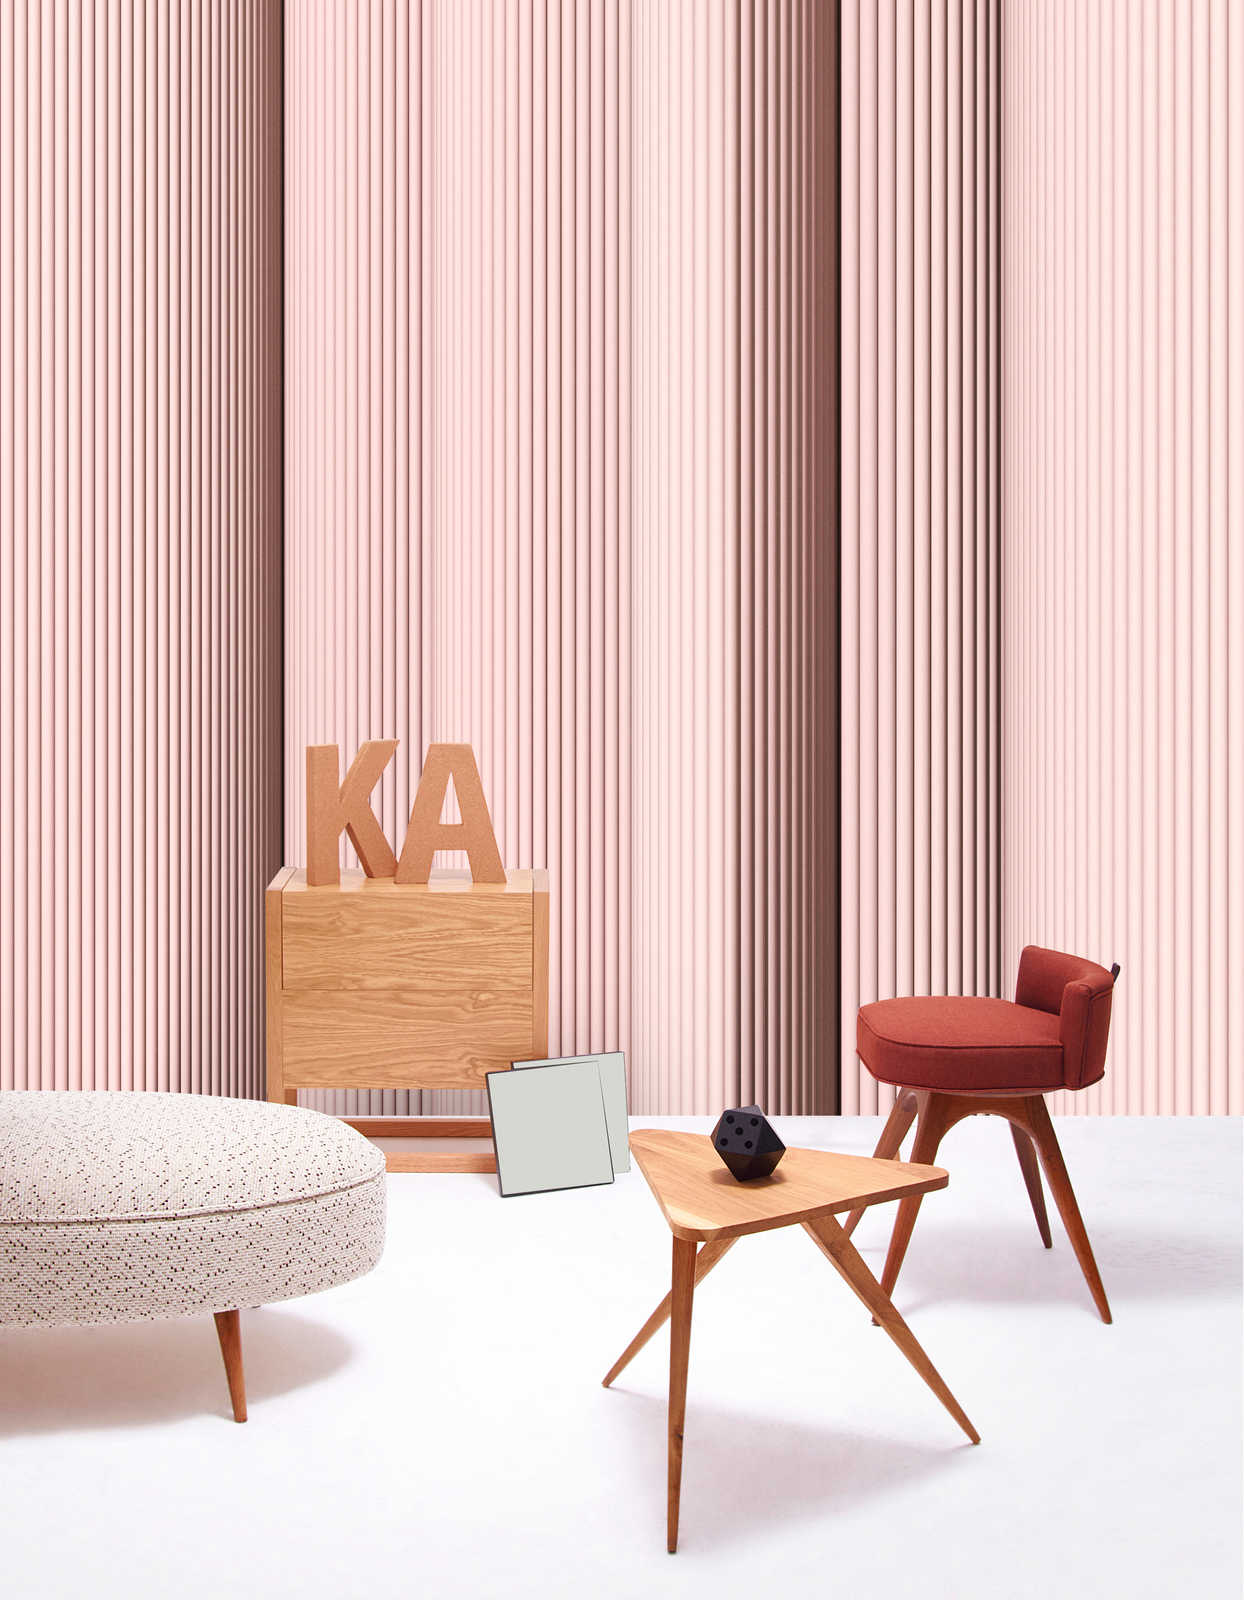             Magic Wall 4 - stripes photo wallpaper with 3D illusion effect, pink & white
        